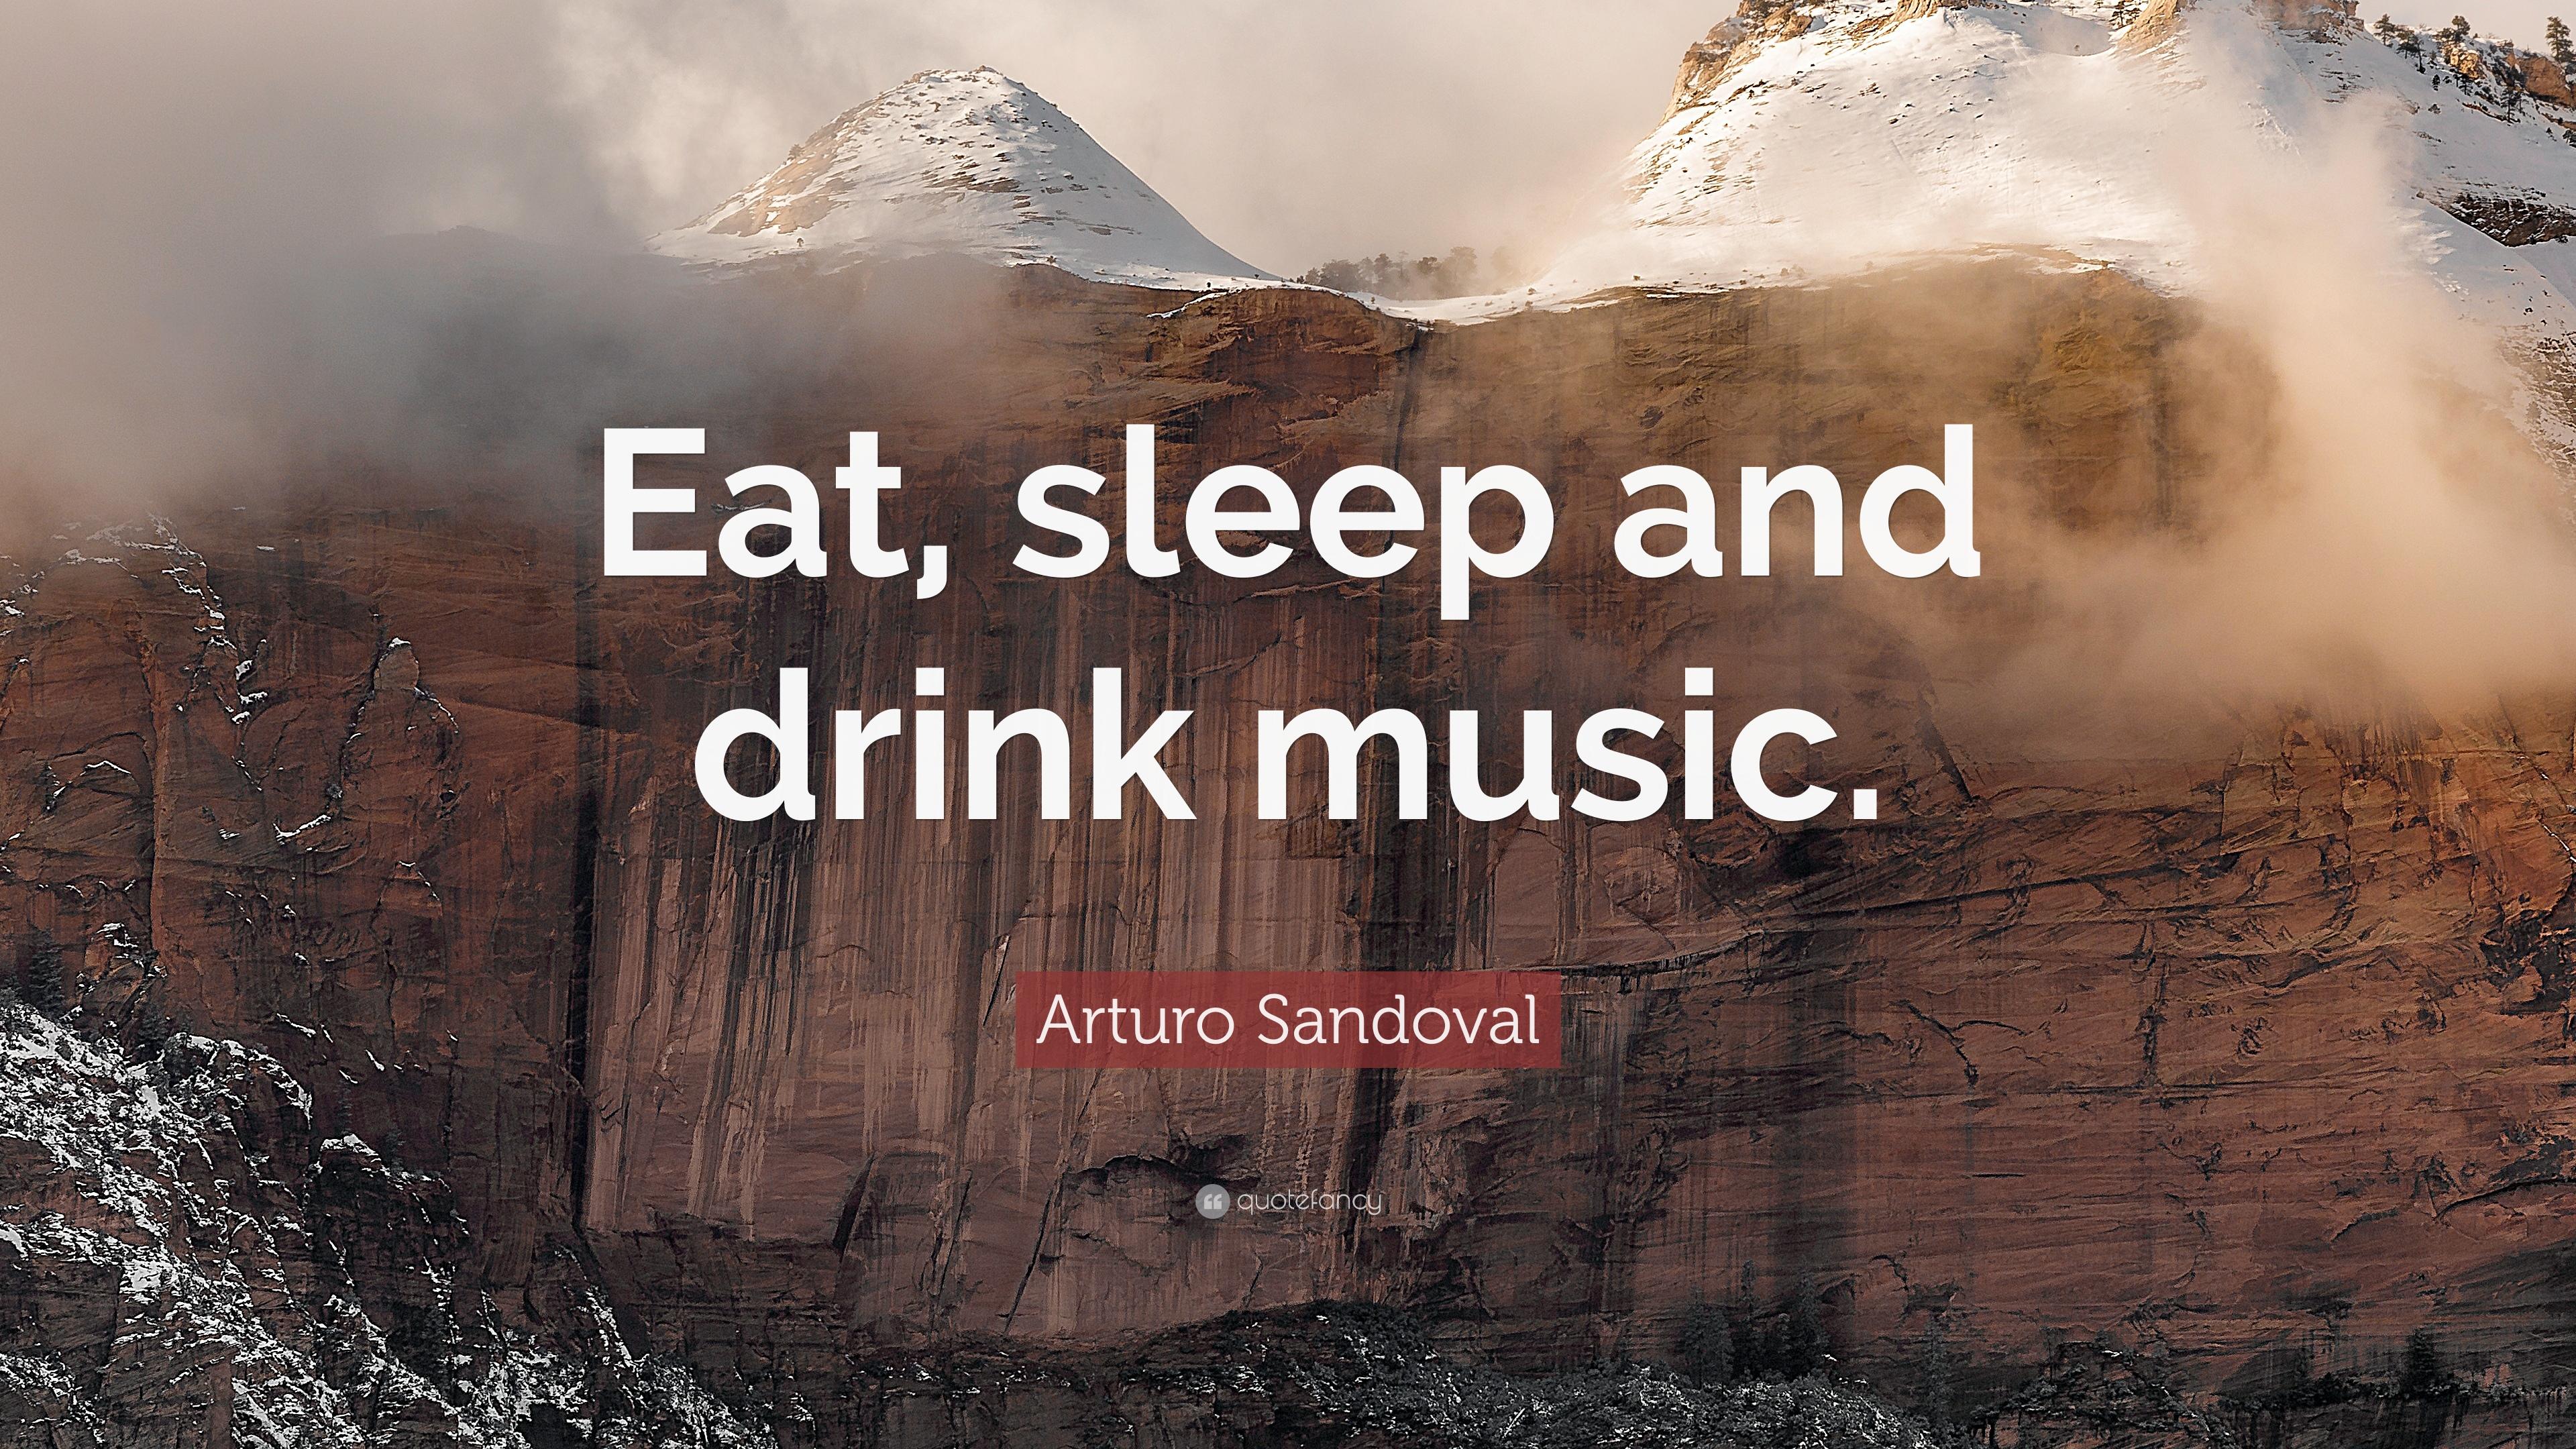 Arturo Sandoval Quote: “Eat, sleep and drink music.” 12 wallpaper